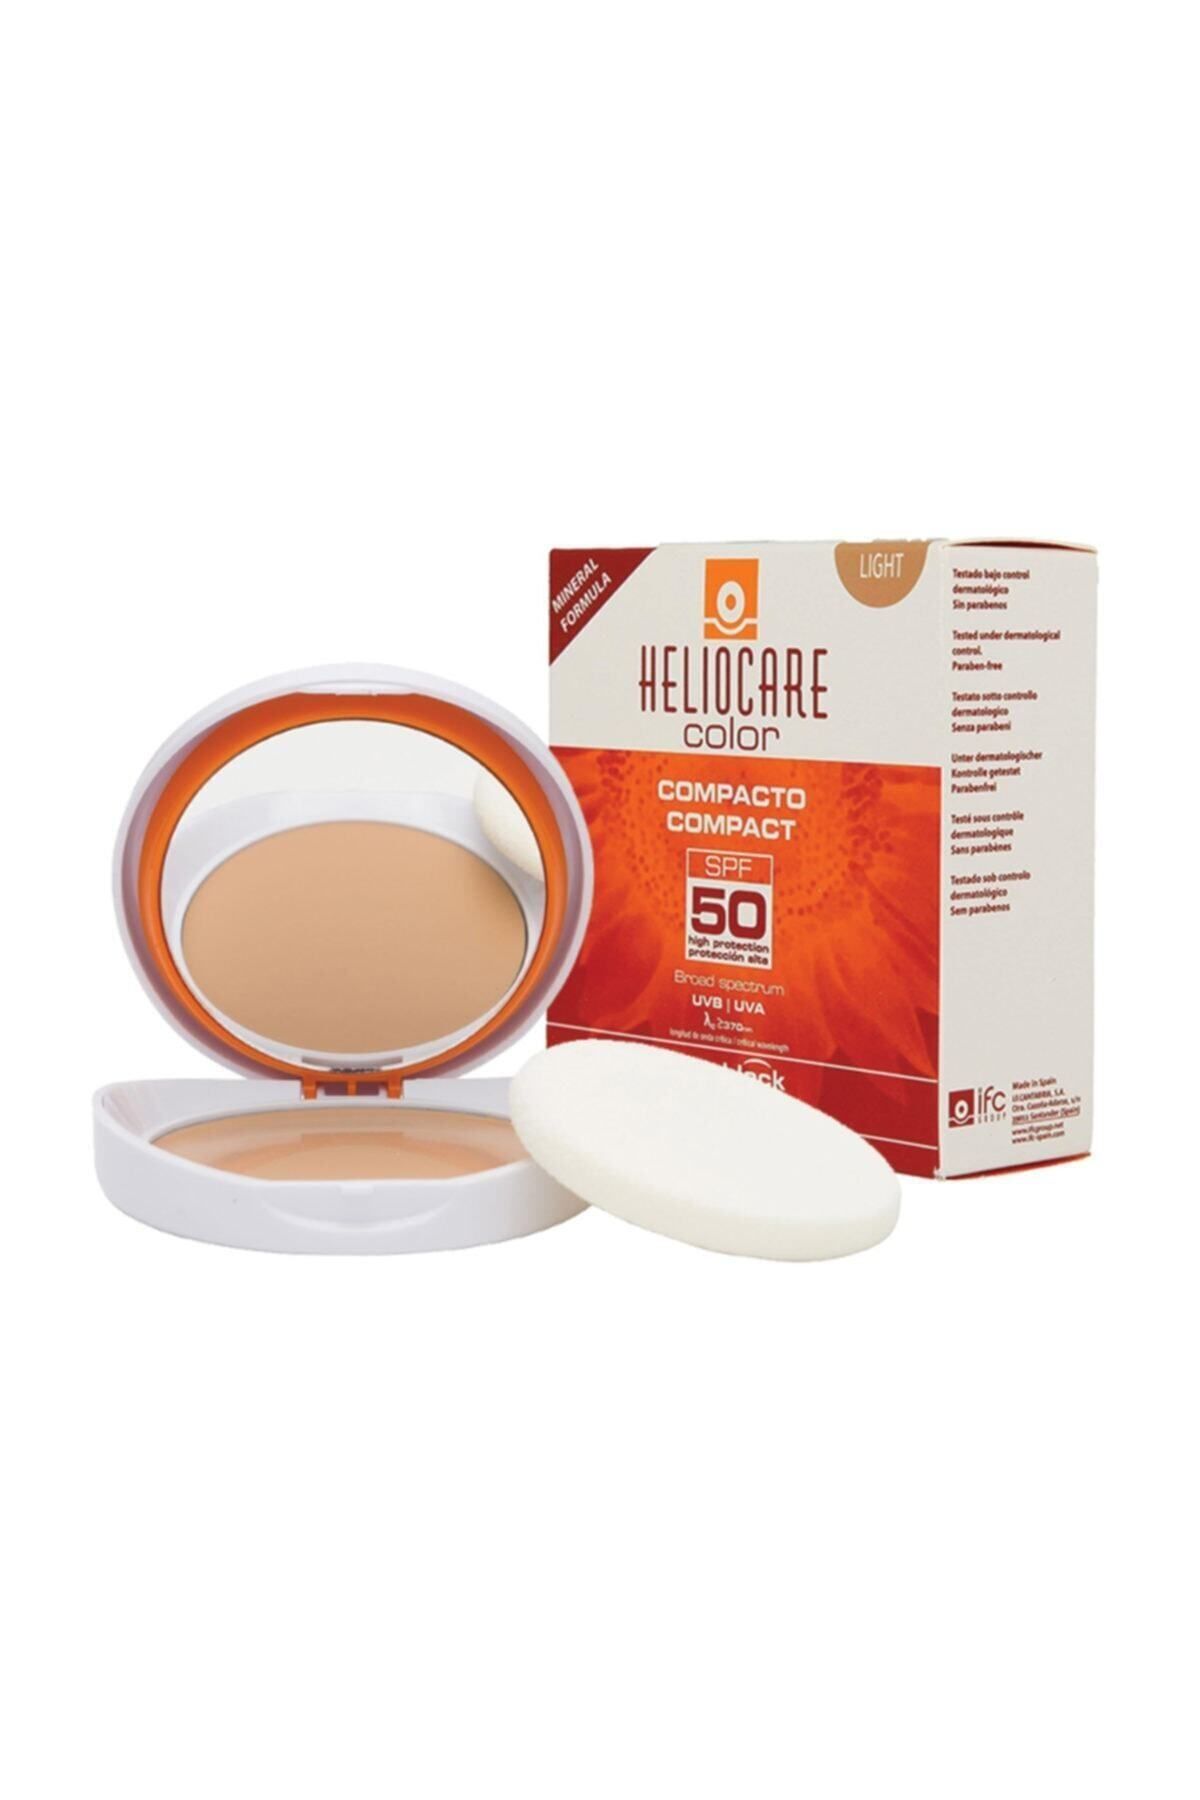 Heliocare Color Compact Light Spf 50 10g